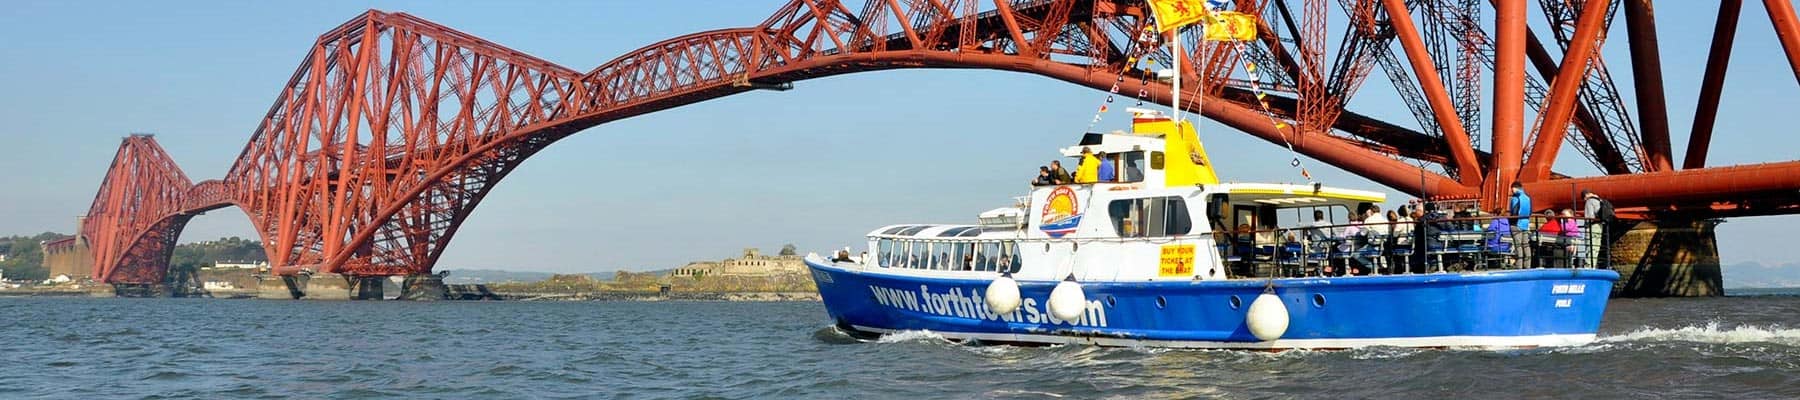 Discounts - Forth Boat Tours